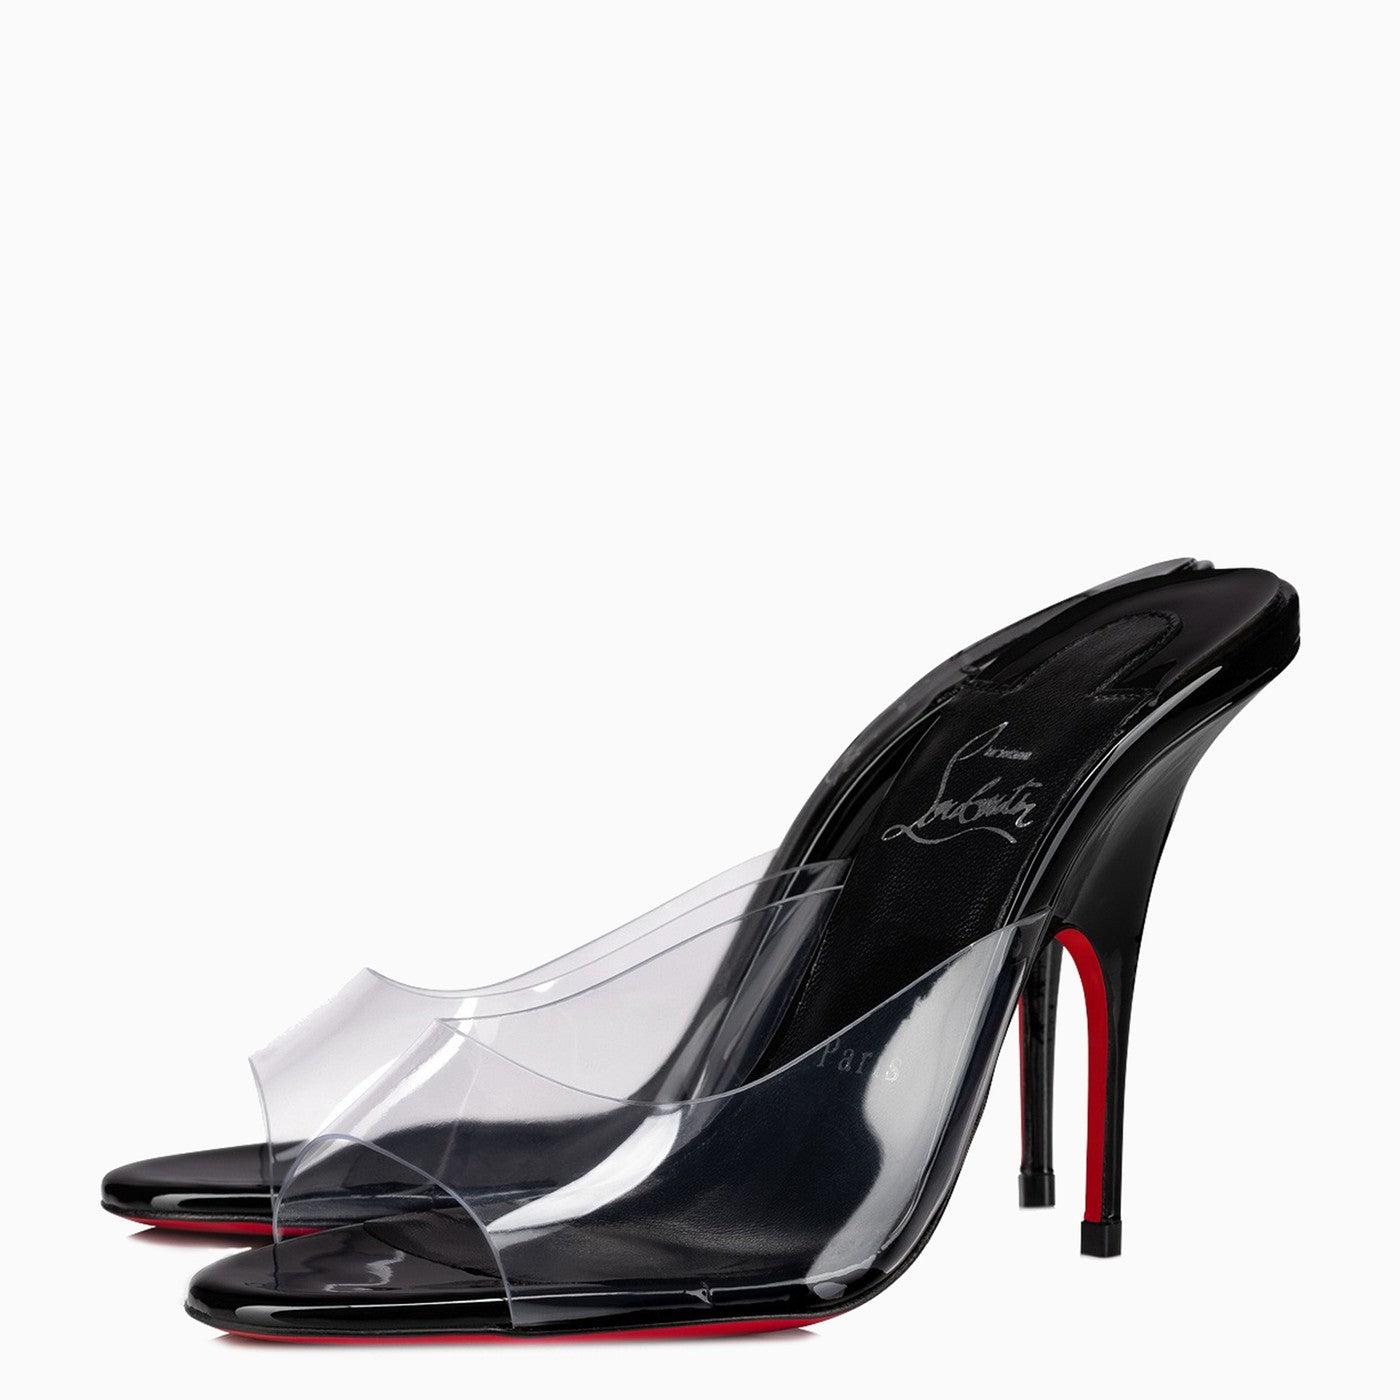 Christian Louboutin Just Arch Sandals In Pvc And Patent Leather in Black |  Lyst